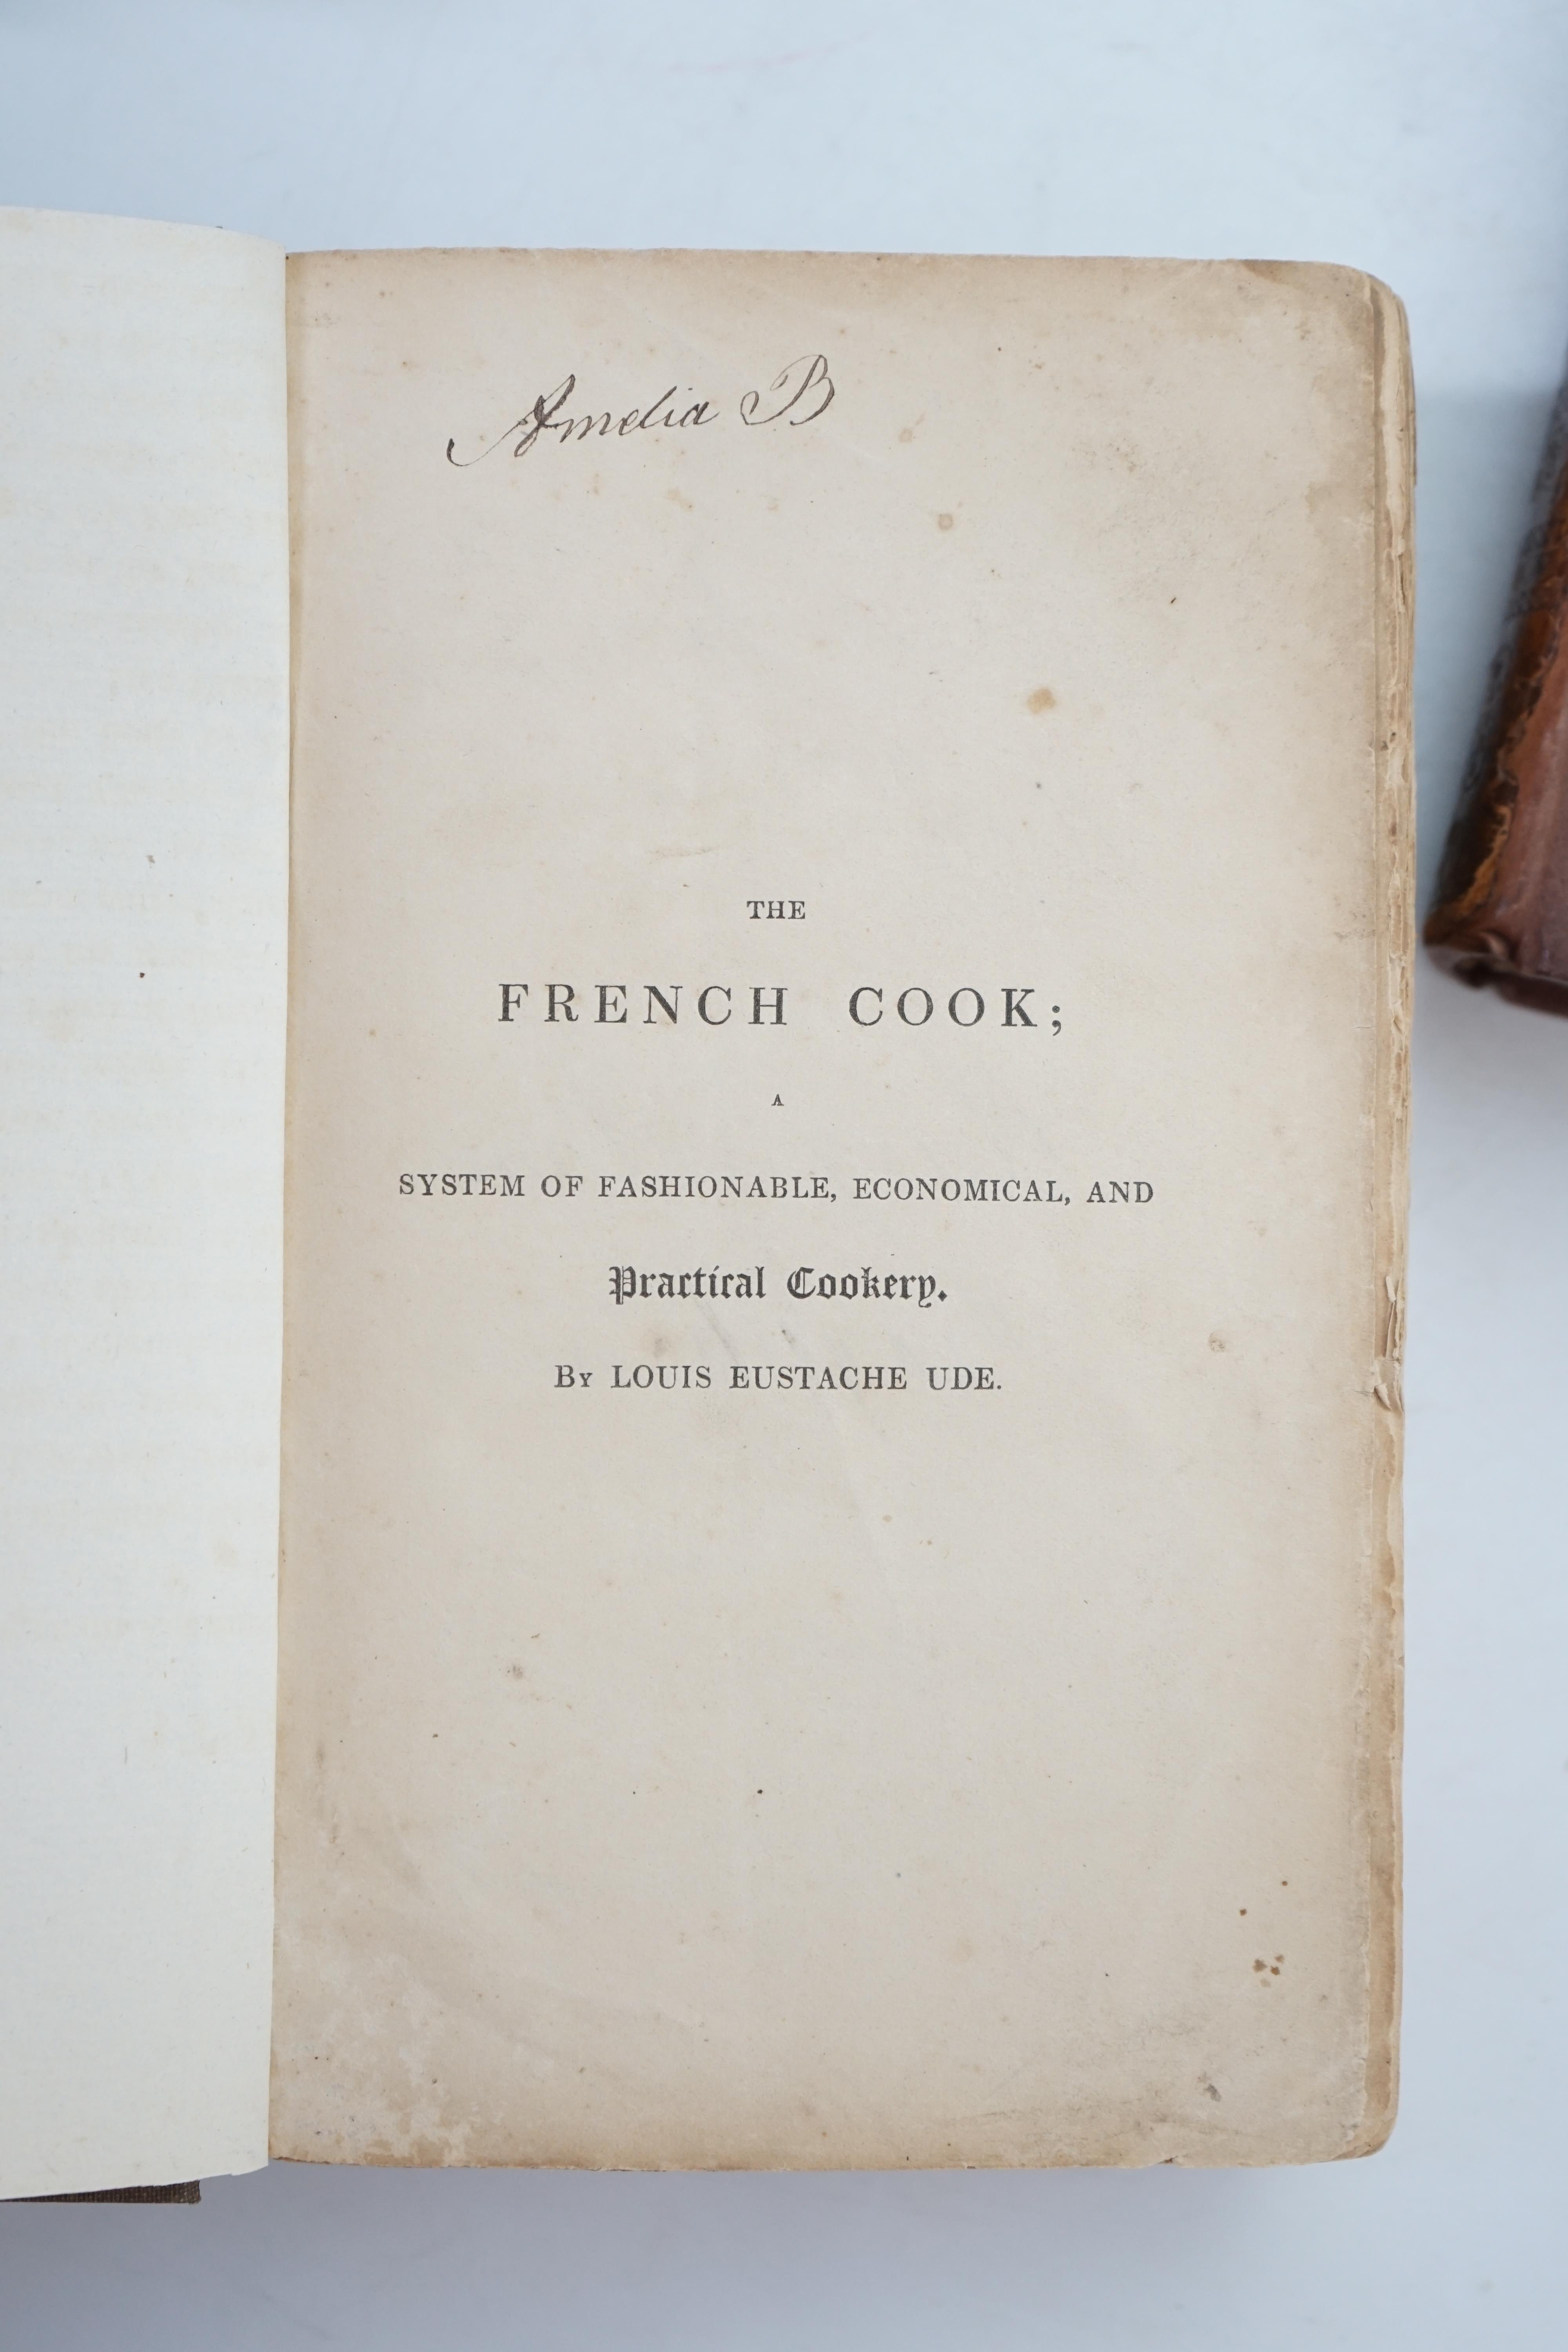 [Glasse, Hannah] The Art of Cookery made Plain and Easy. A New Edition With all the Modern Improvements, 8vo, calf rebacked, front fly inscribed - ‘‘Elizabeth Barker October 7th 1782 Her Book’’, W.Strahan et al, London,